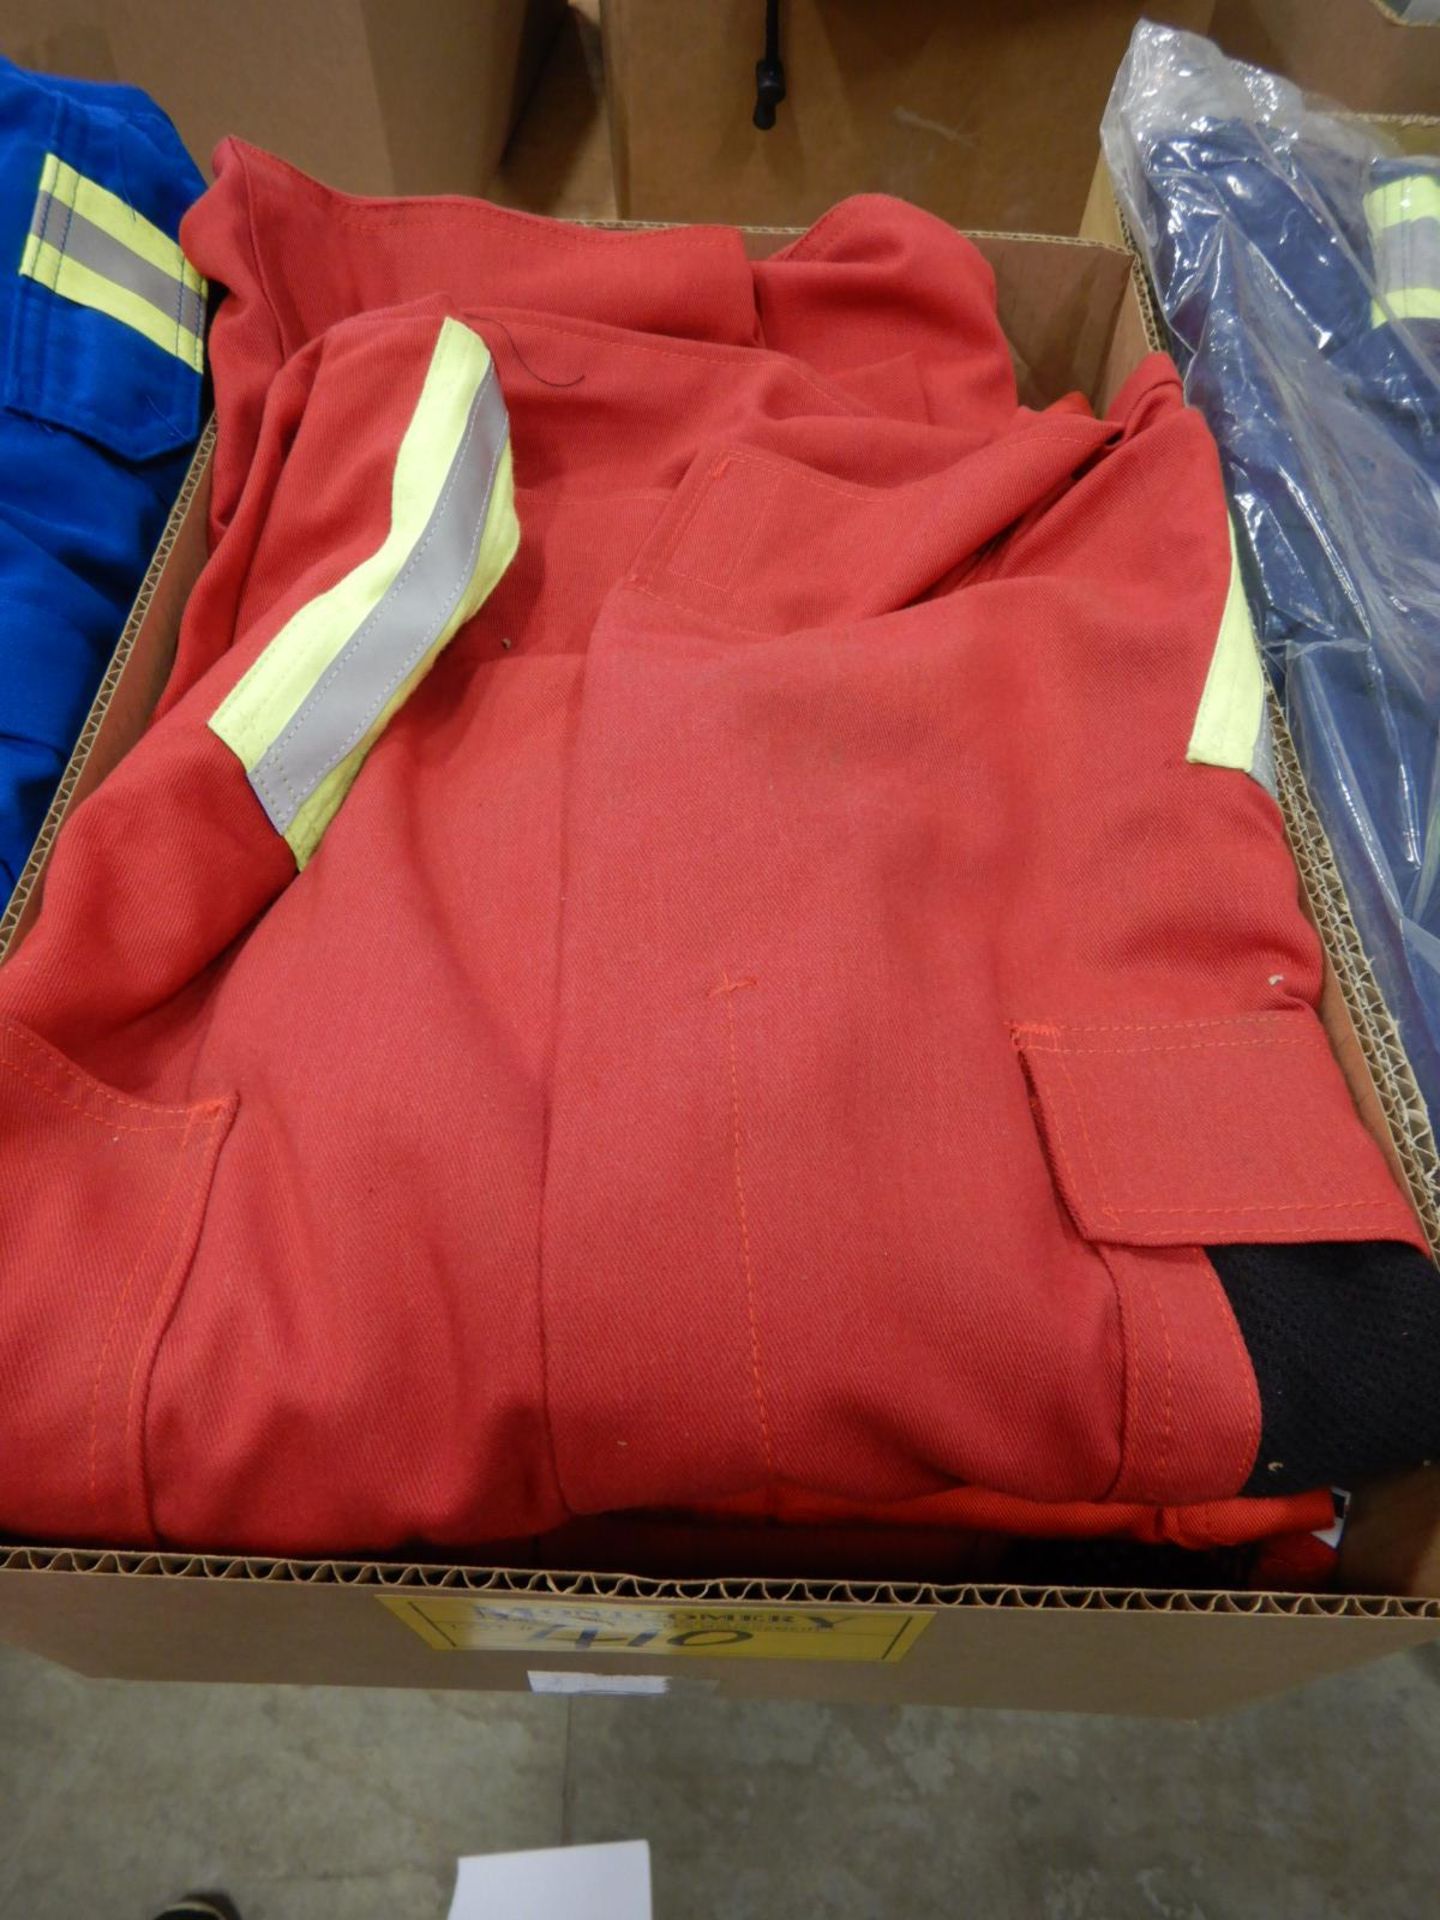 L/O 3-FR COVERALLS, SIZE 58, RED